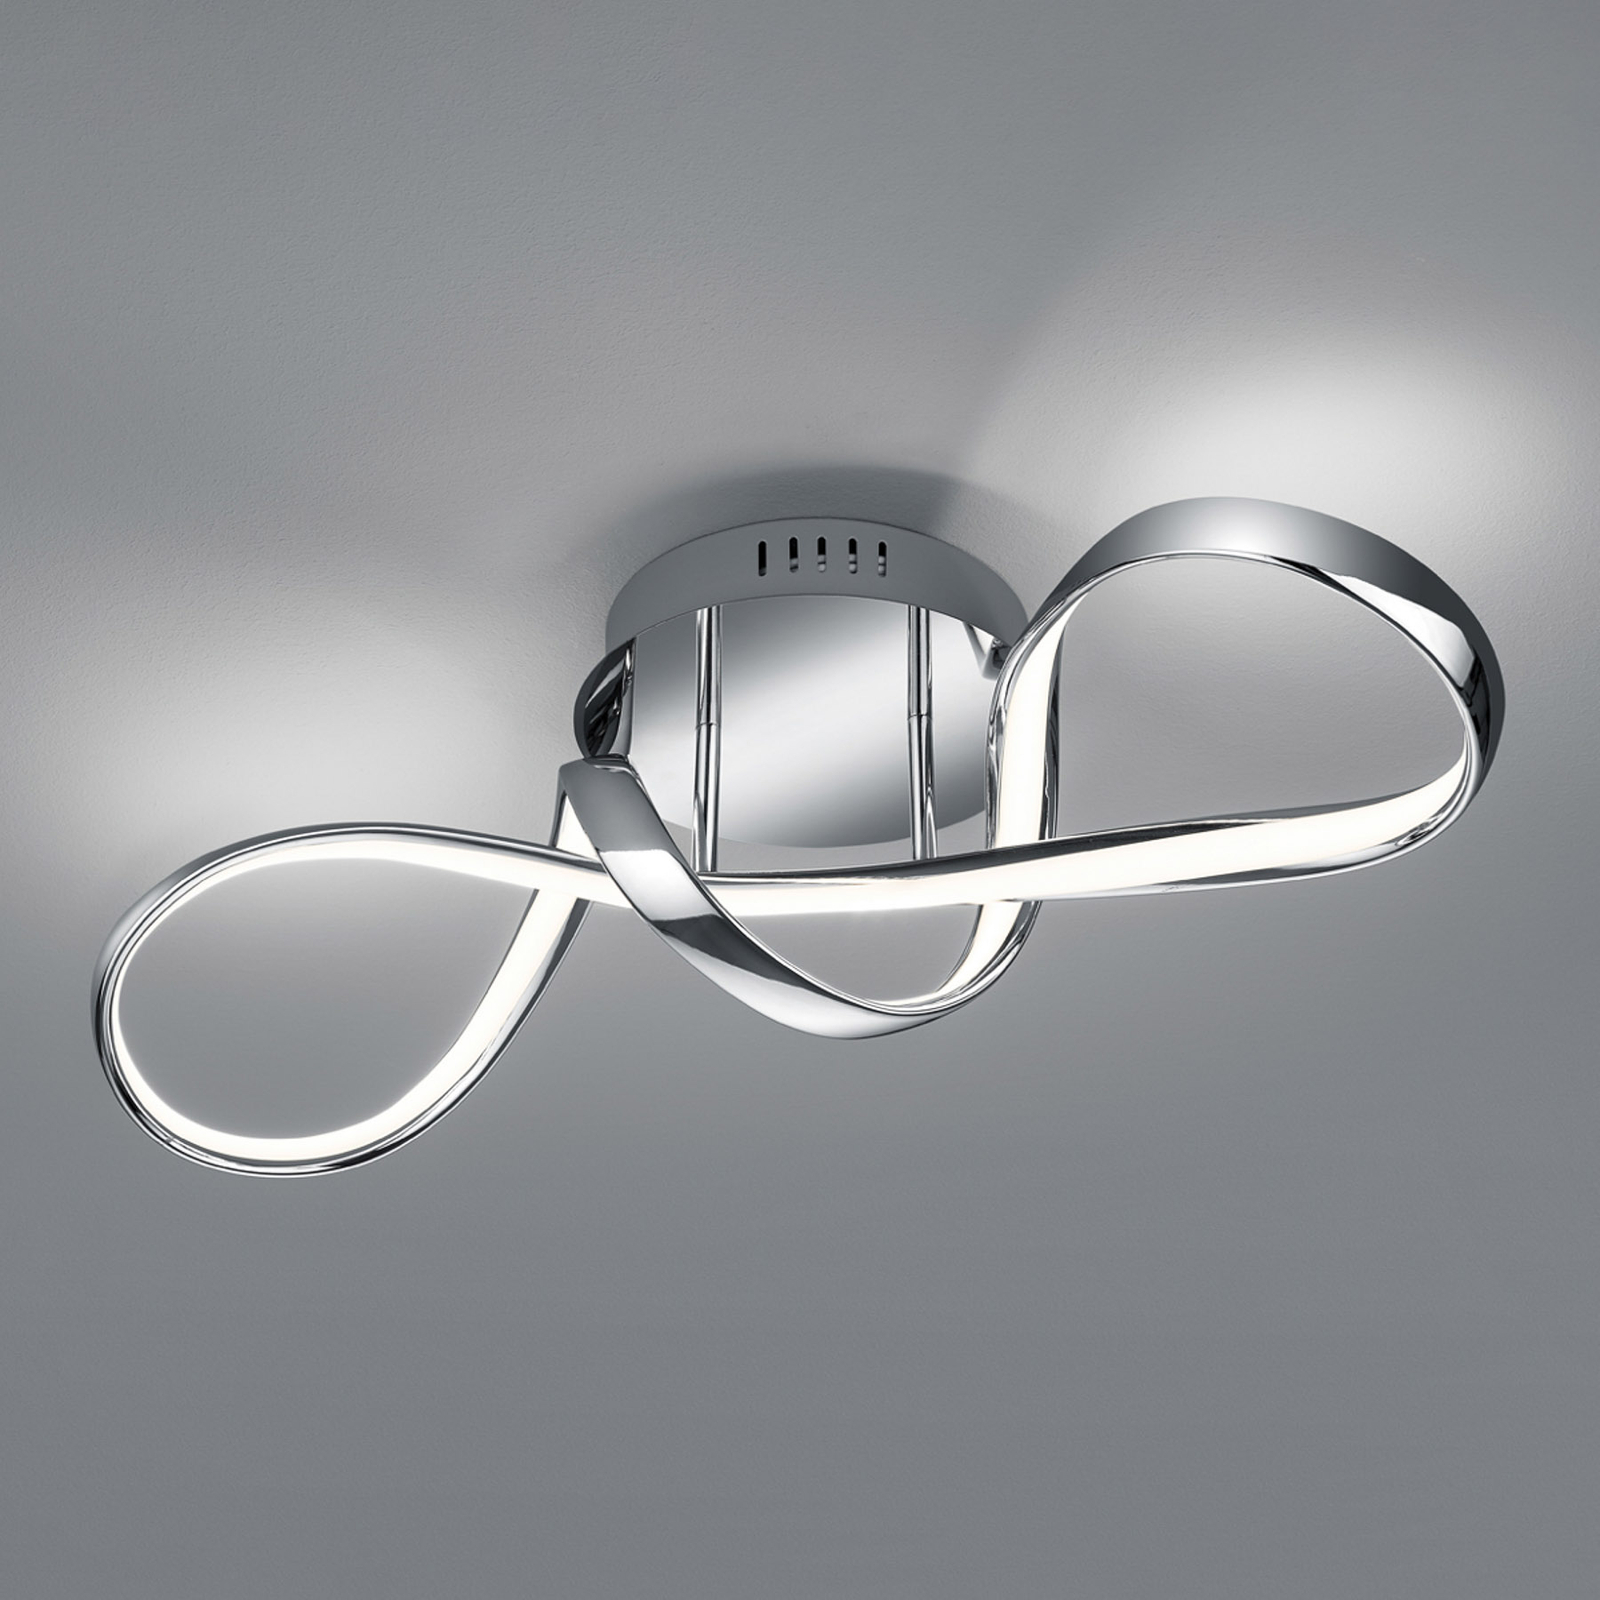 Perugia LED ceiling light, switch dimmer, chrome